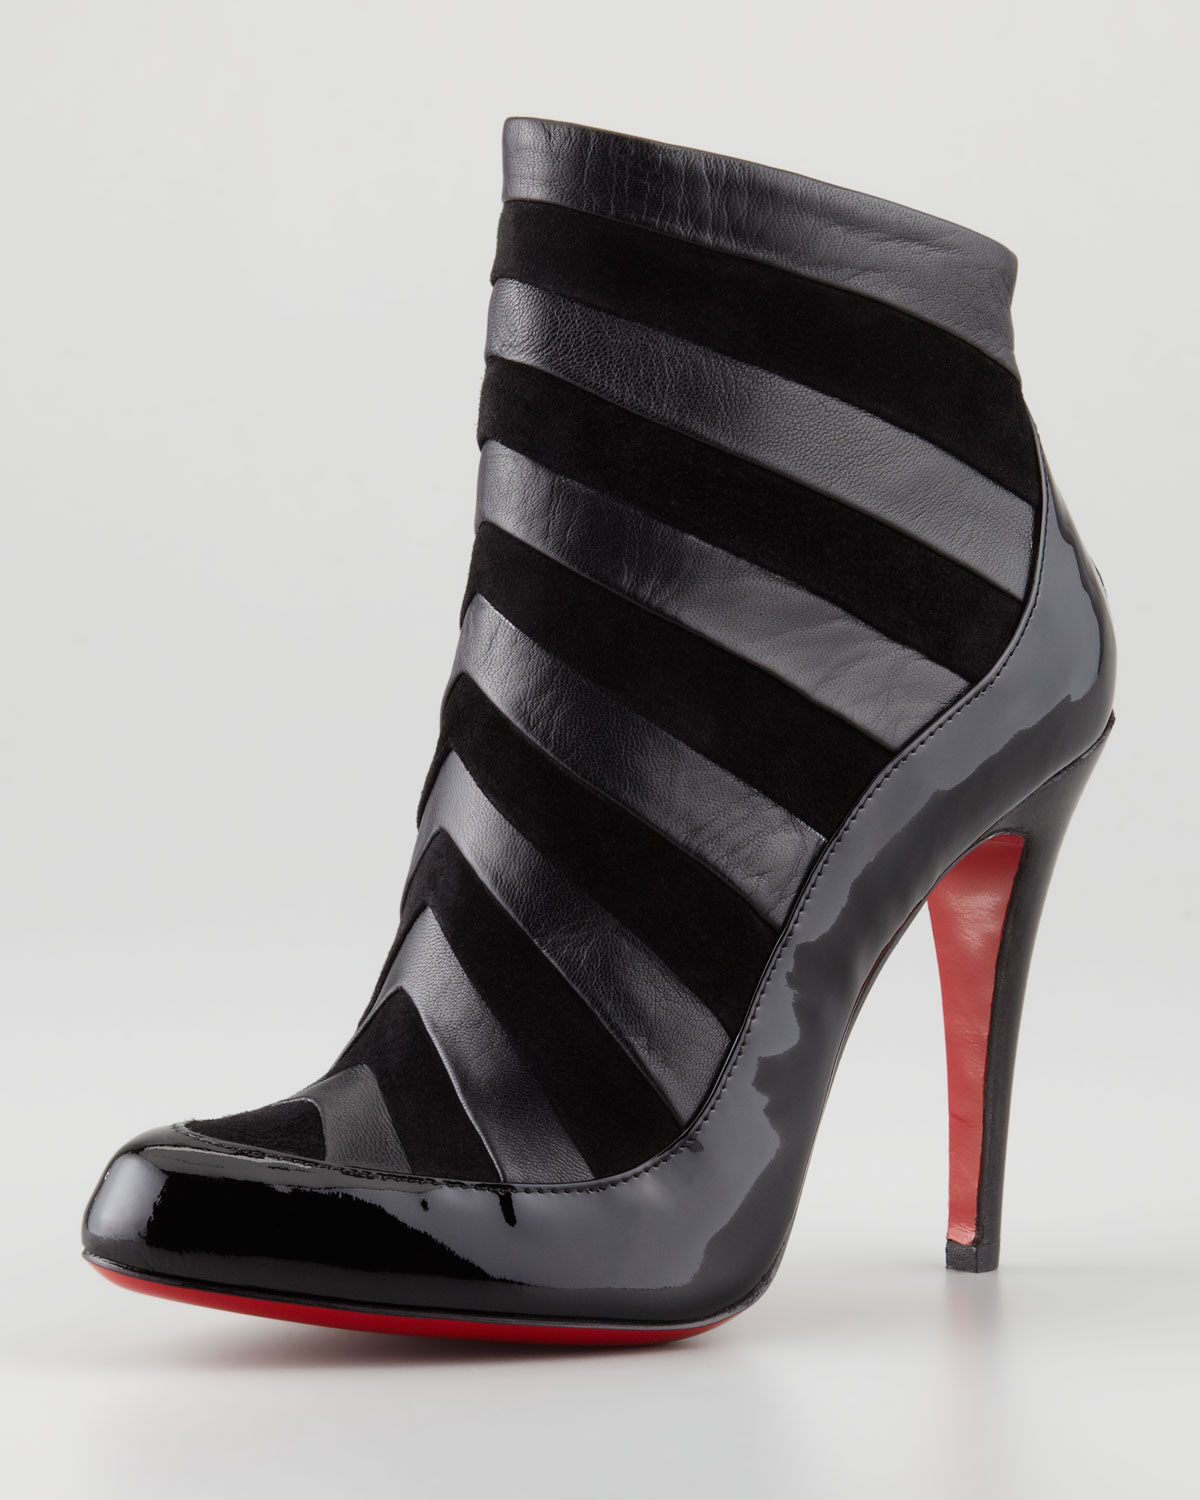 christian louboutin knockoffs - Christian louboutin Amor Patent-suede Bootie Black in Black (BLACK ...